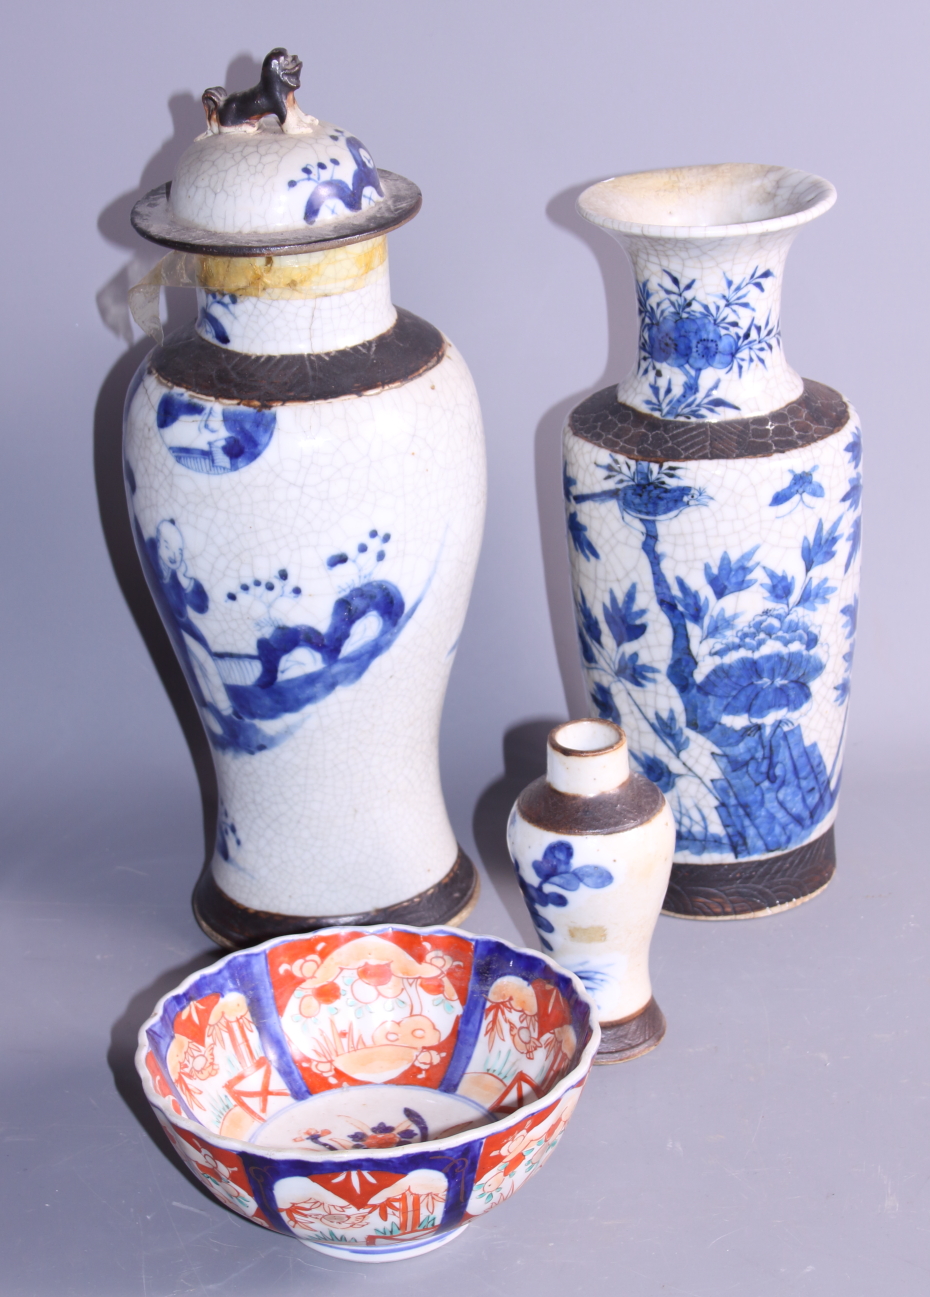 Two 19th century Chinese crackle ware jars, 5" high, a smaller similar vase